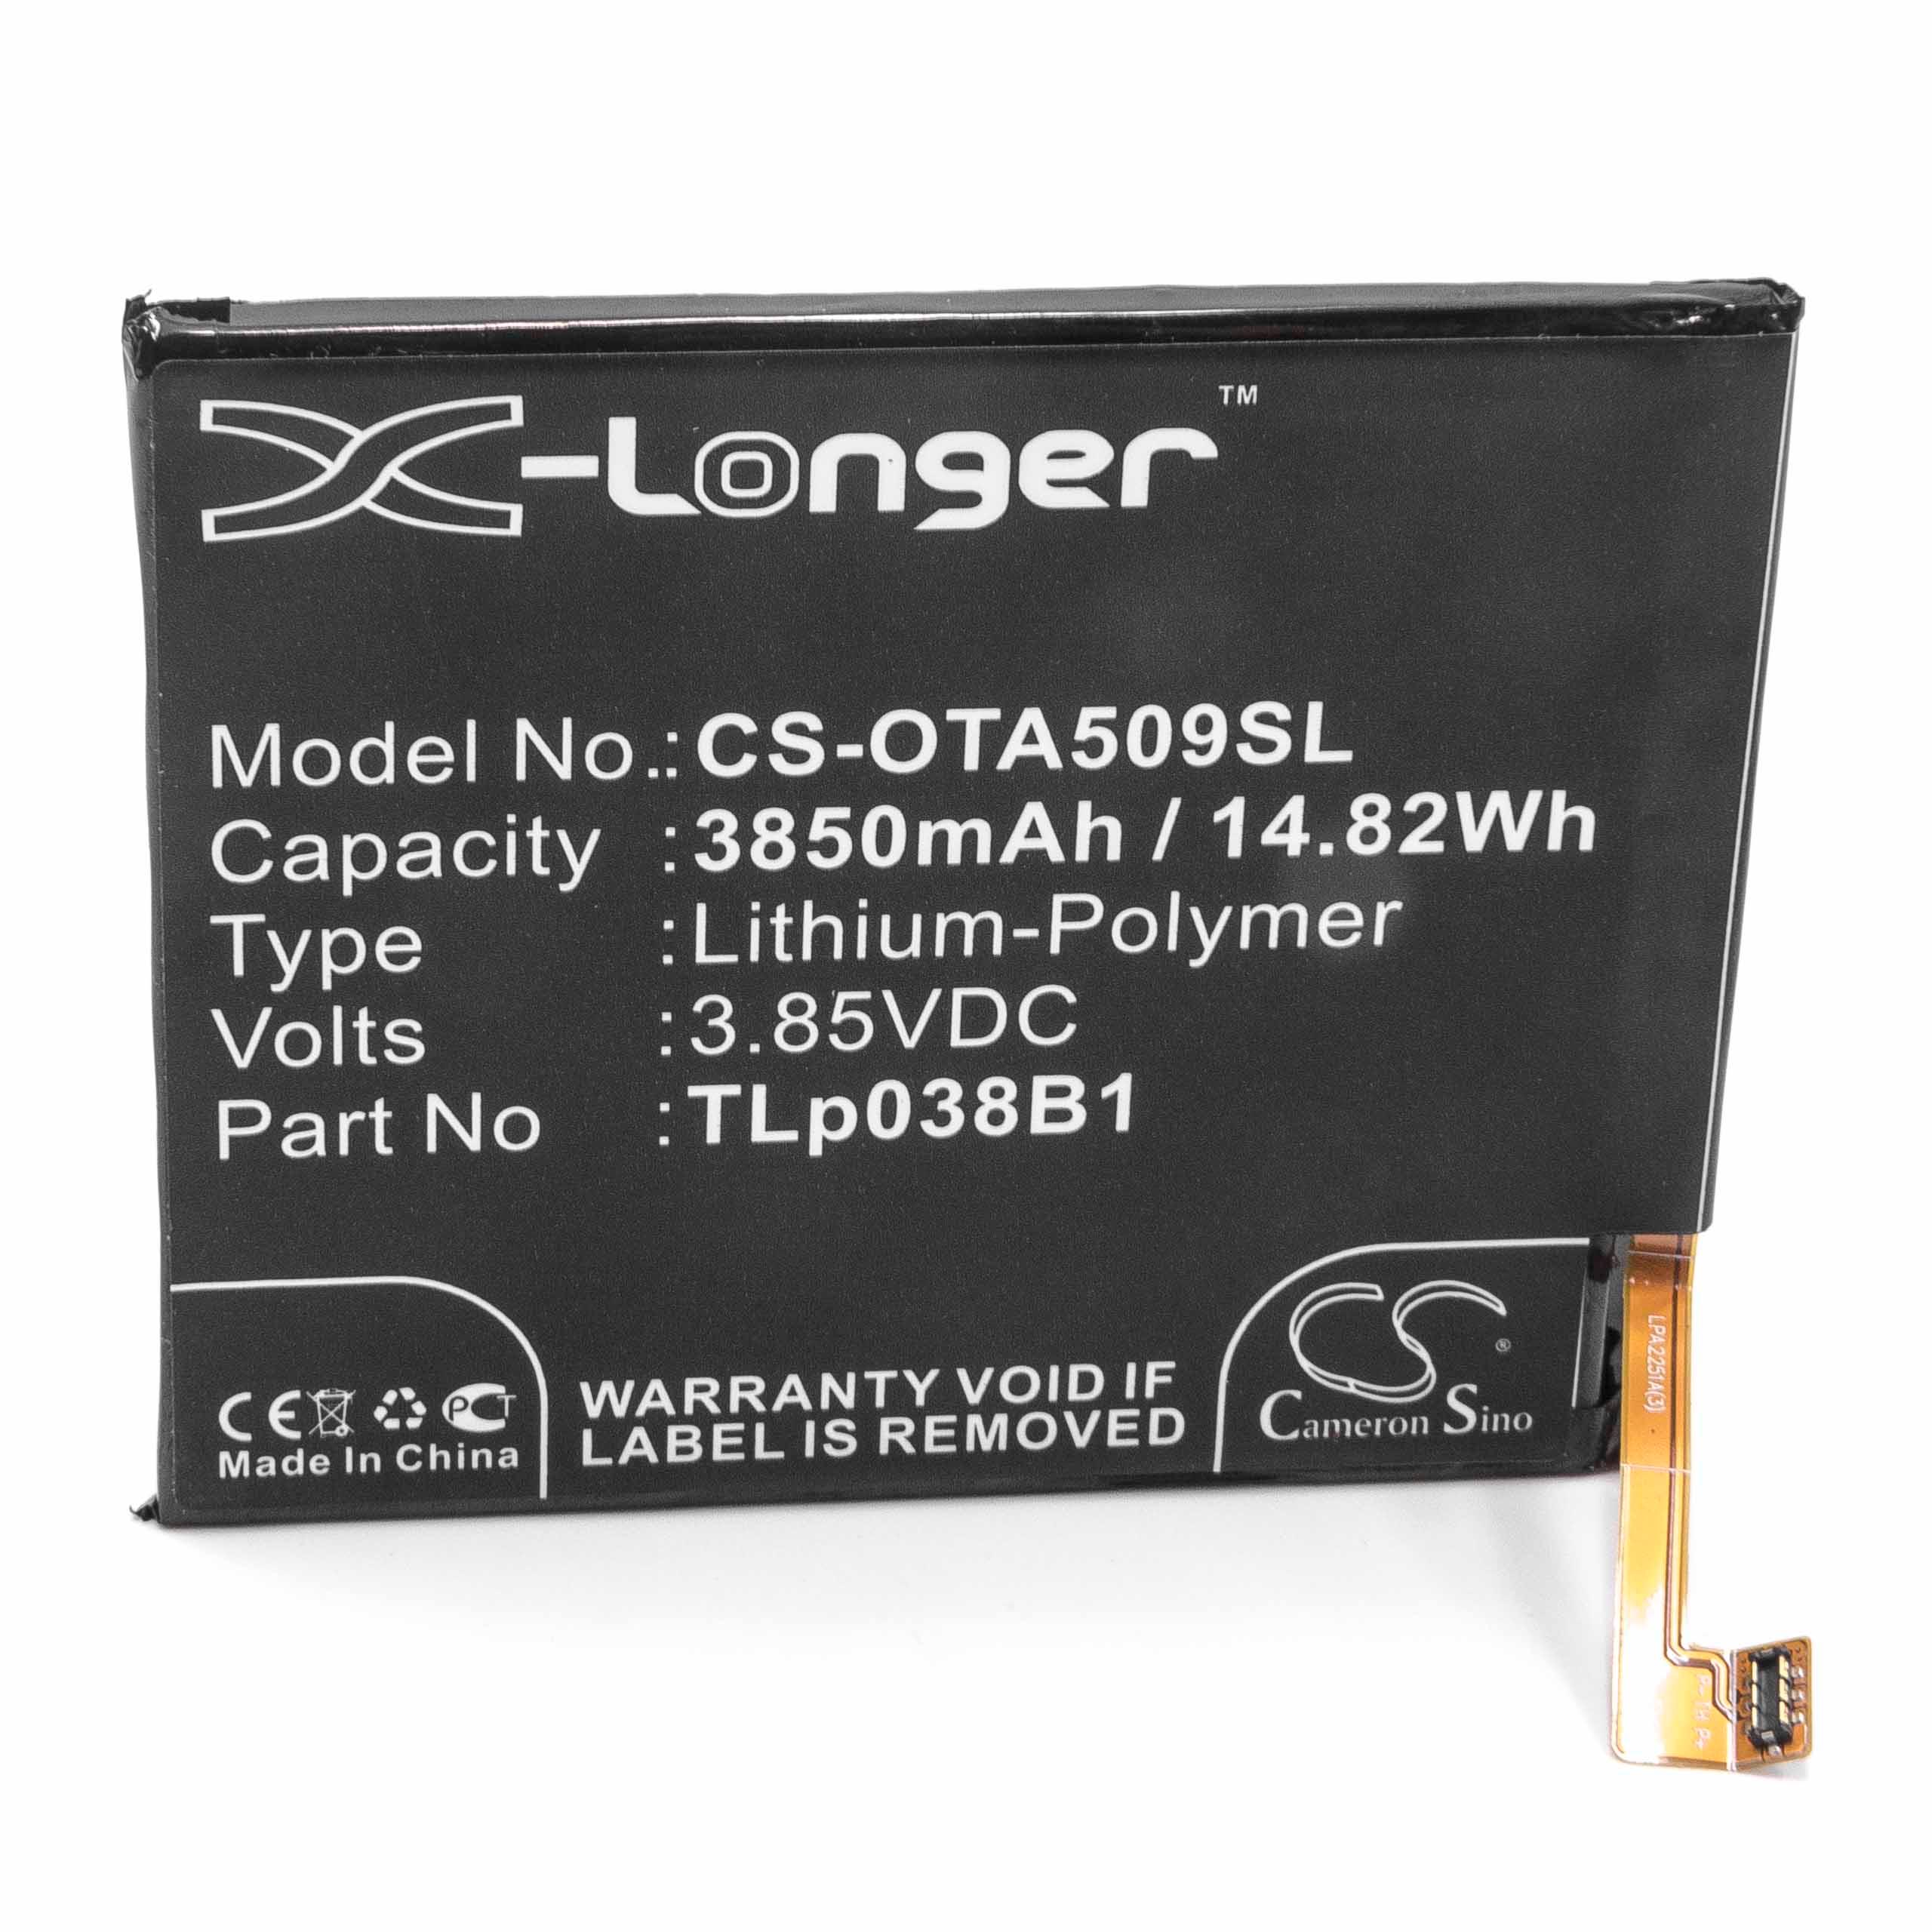 Mobile Phone Battery Replacement for Alcatel CAC3860004C1, TLp038B1 - 3850mAh 3.85V Li-polymer